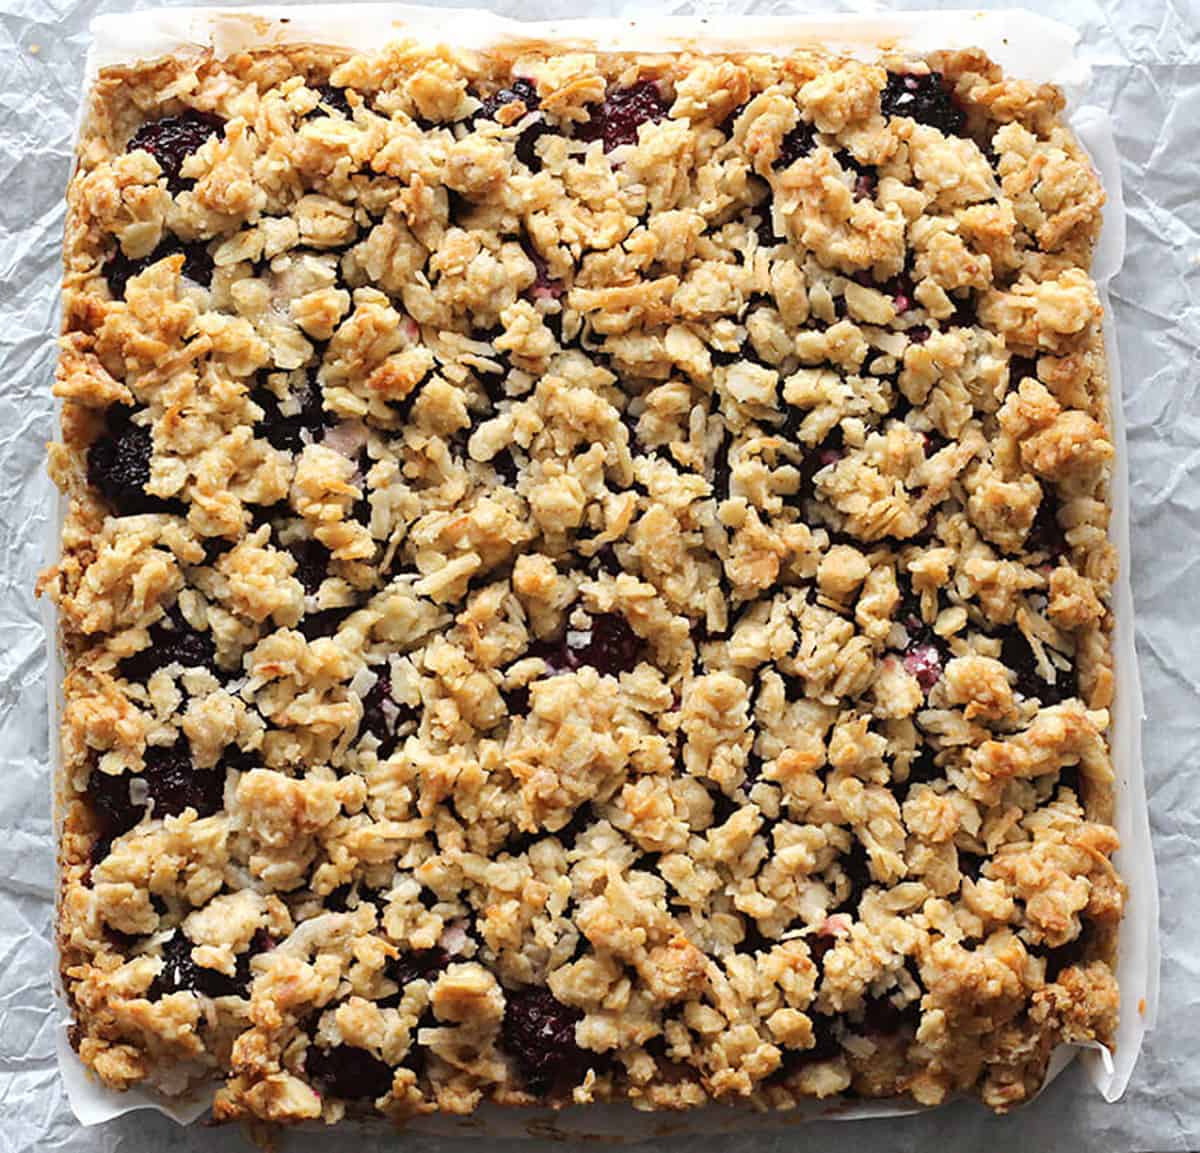 homemade blackberry oatmeal bars -unsliced - with golden brown crunchy topping just out of the oven!